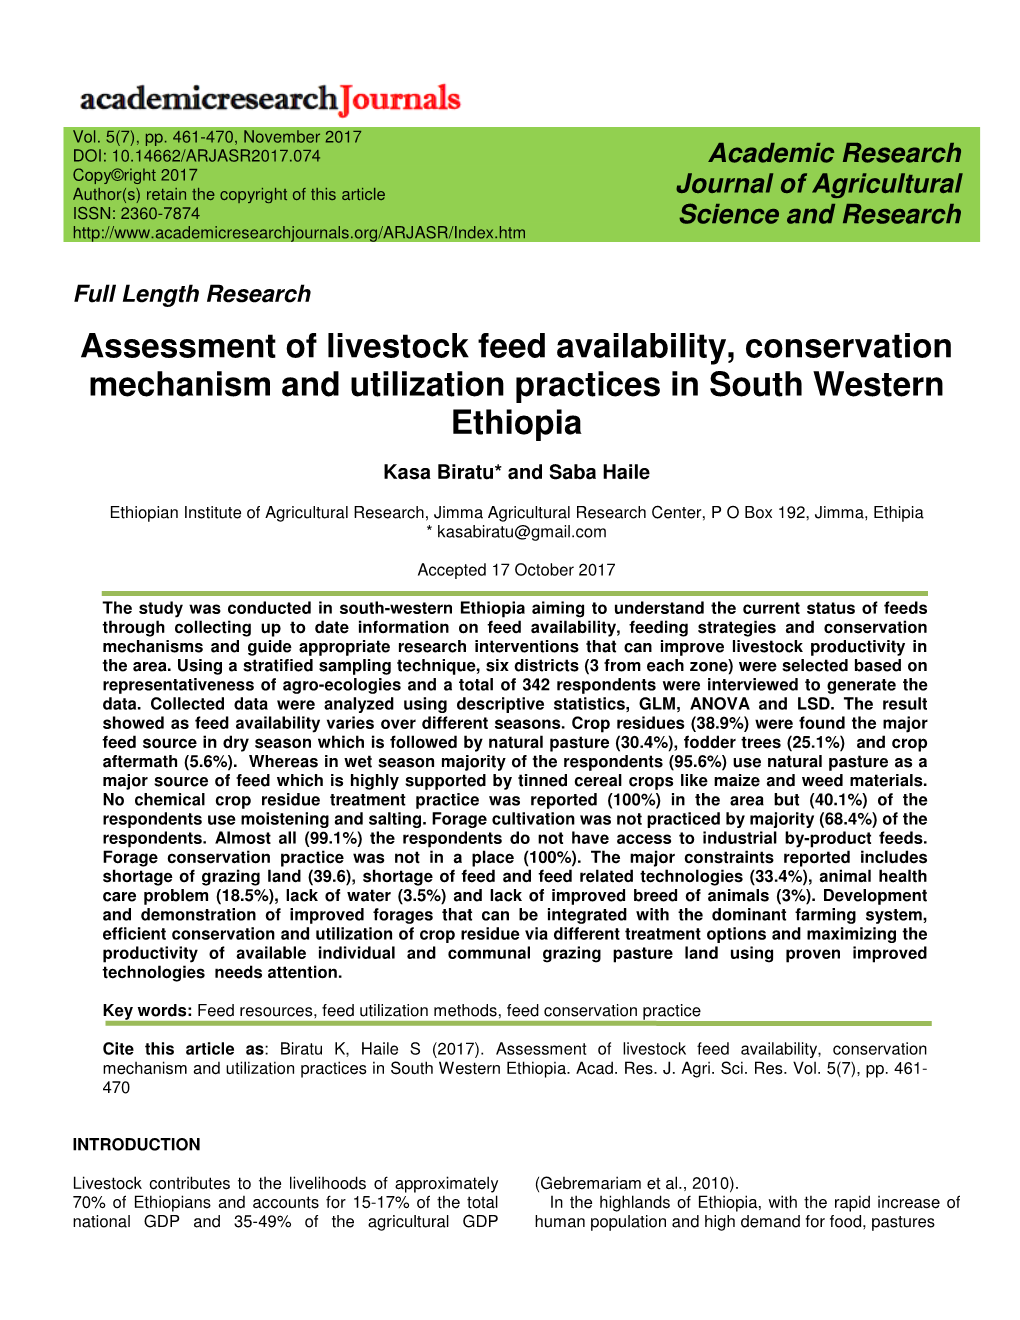 Assessment of Livestock Feed Availability, Conservation Mechanism and Utilization Practices in South Western Ethiopia